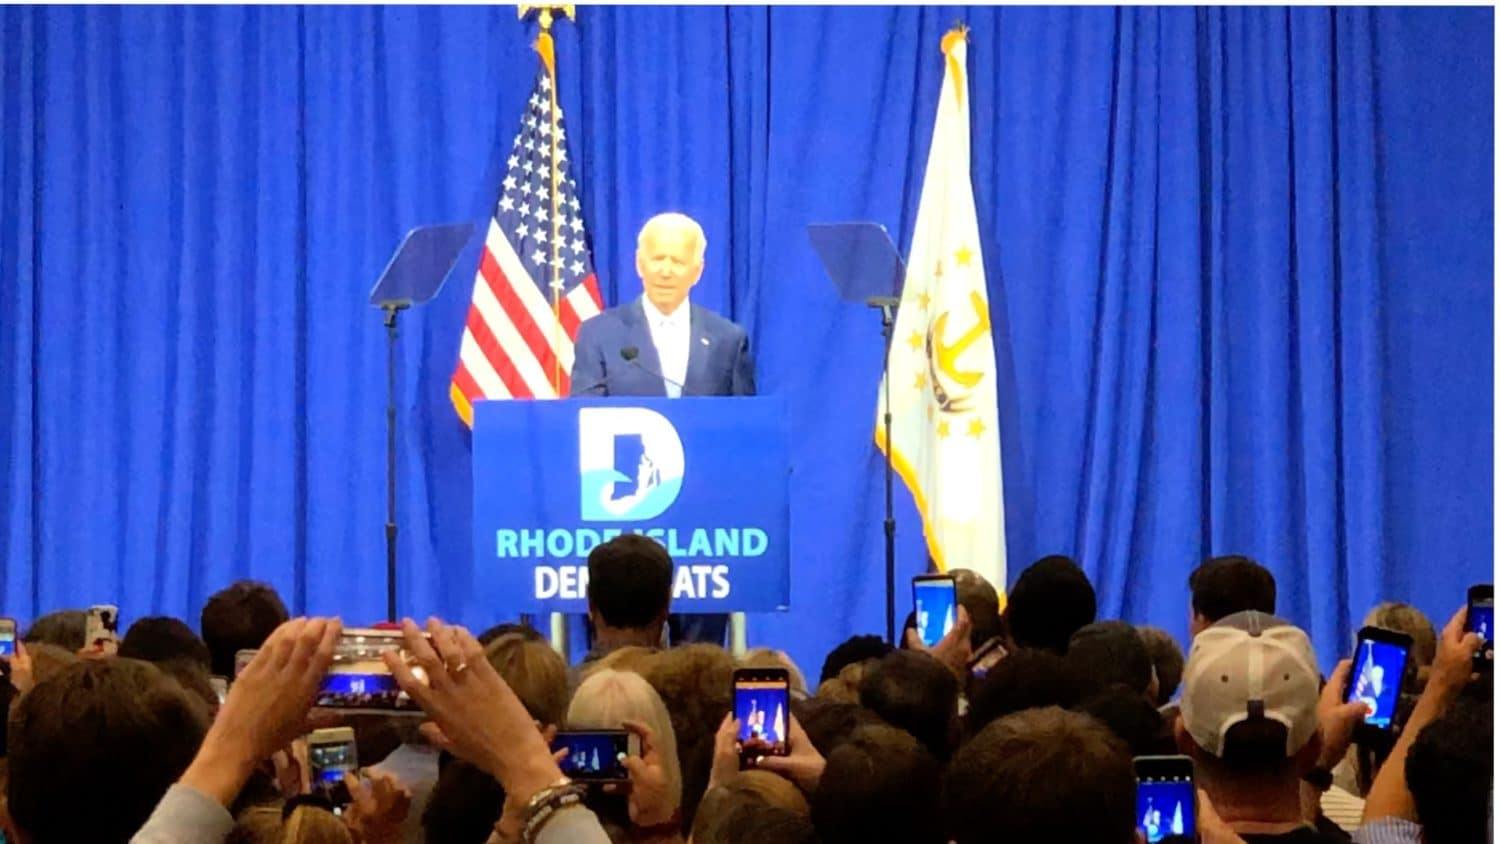 Joe Biden comes to Providence to stump for Democrats ahead of November elections